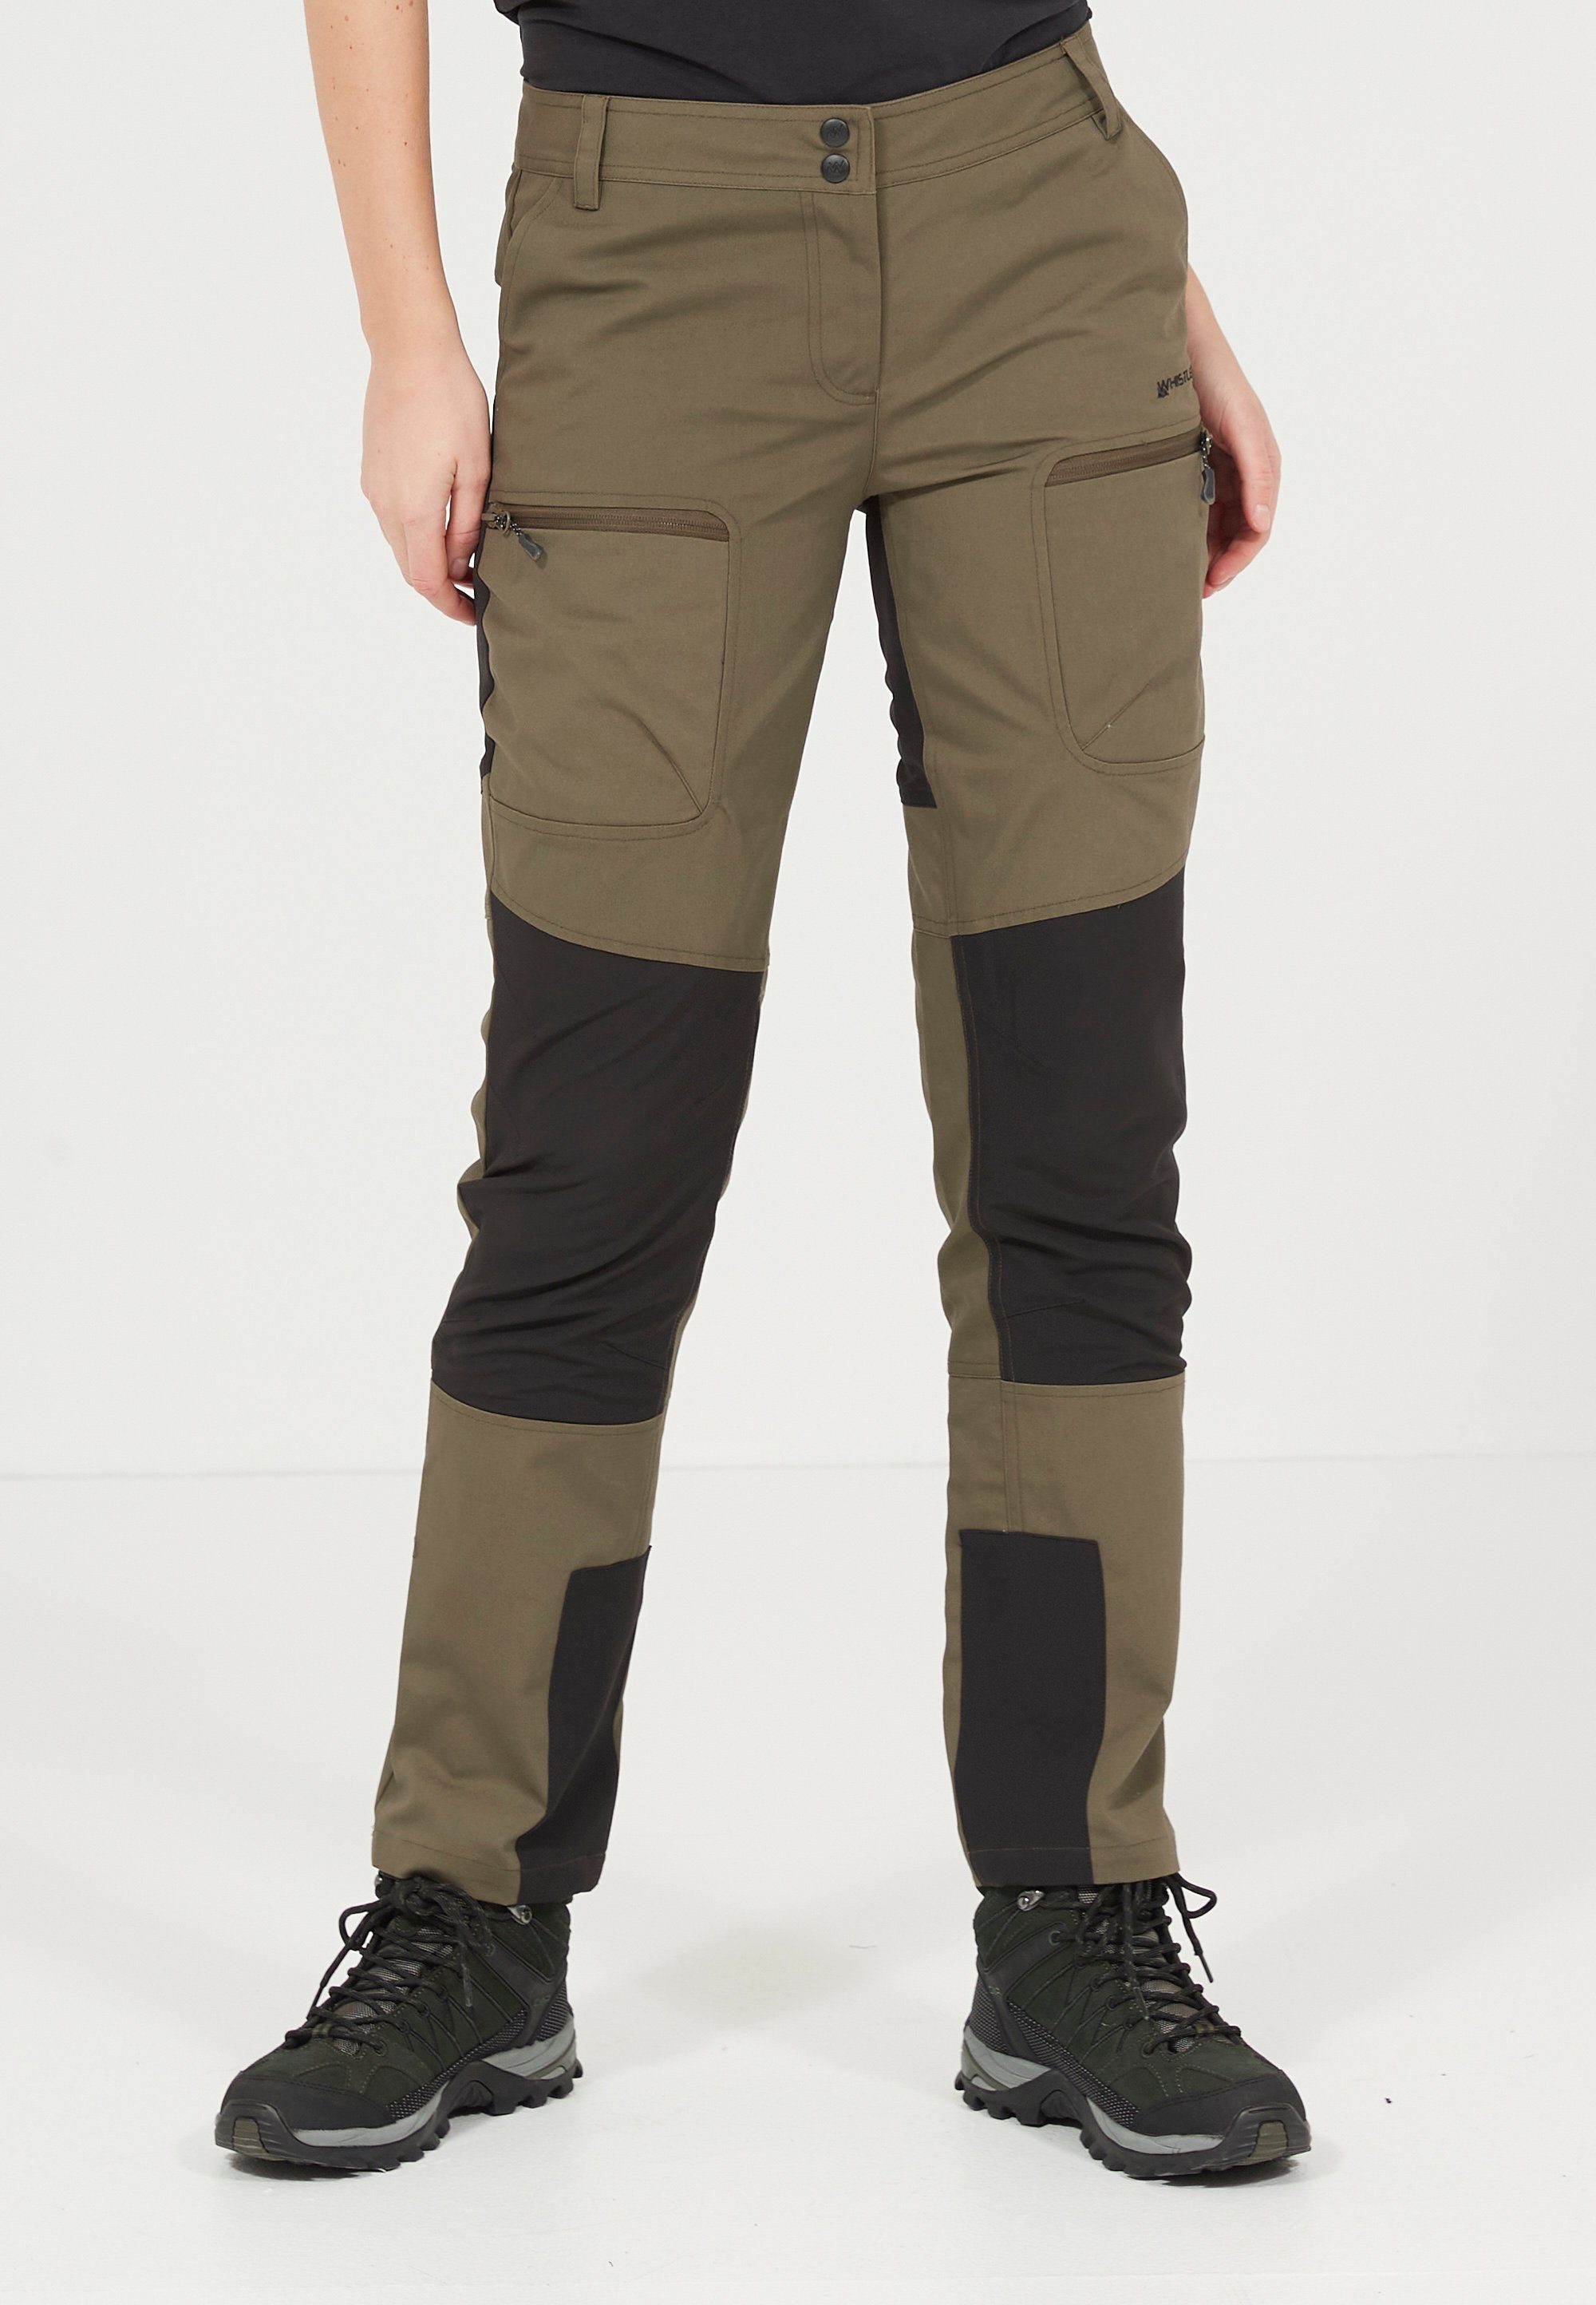 Cargohose WHISTLER funktionalen Kniepatches ACTIV BLEE PANTS mit W